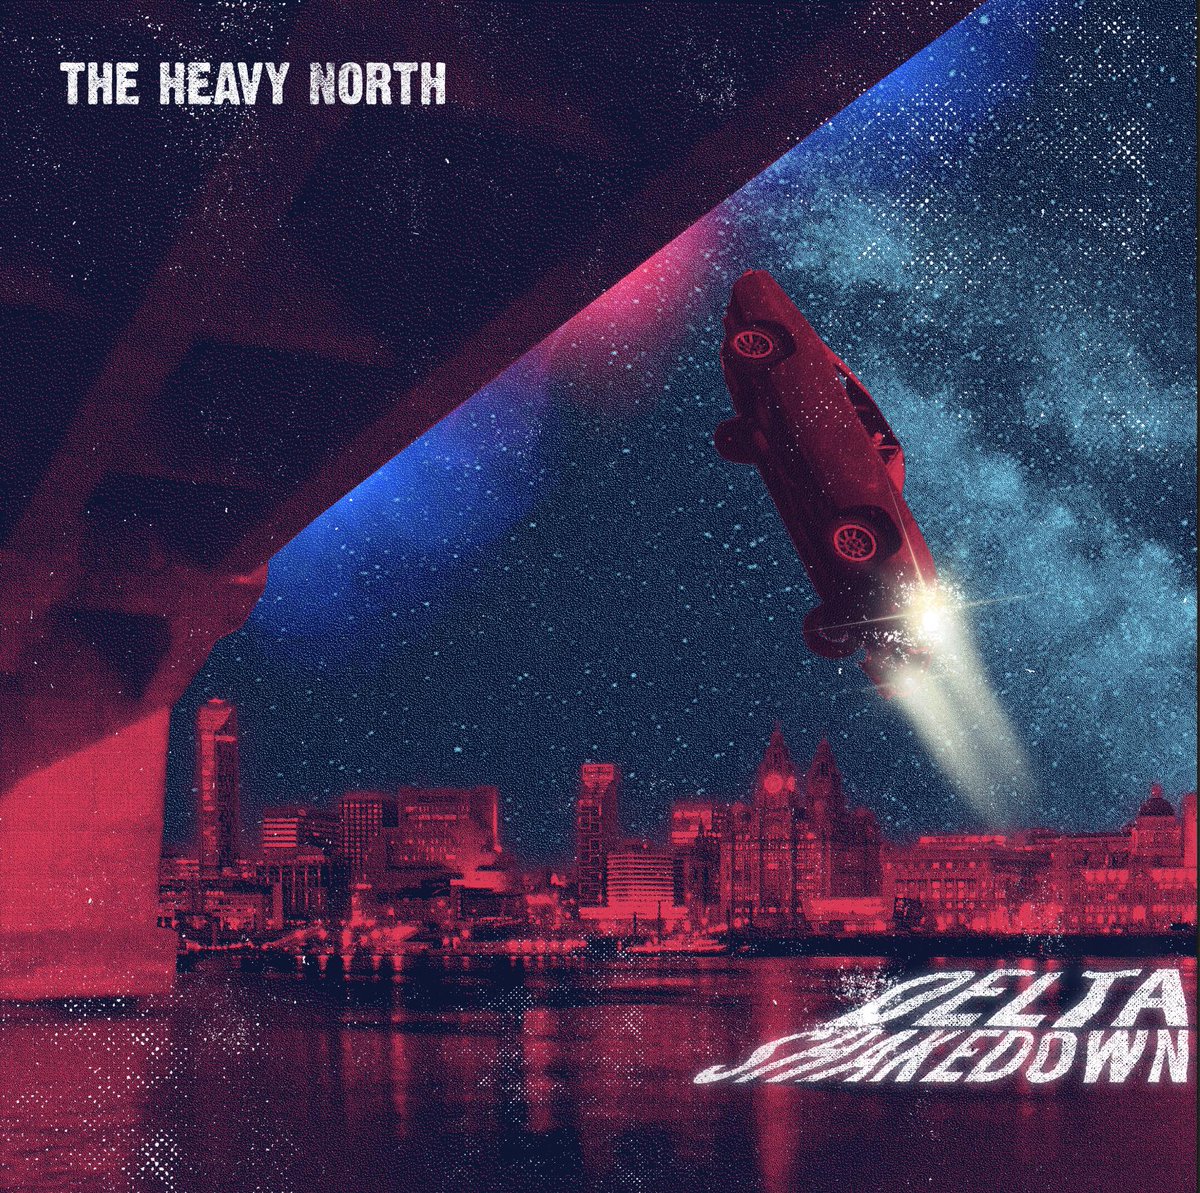 It is the 19th May finally this means from 10am the 2nd album #deltashakedown from @theheavynorth is available to Pre-Order on 12' gatefold ( Red or Blue ) @waxandbeans 1 hour to go ⬇️⬇️💙😜